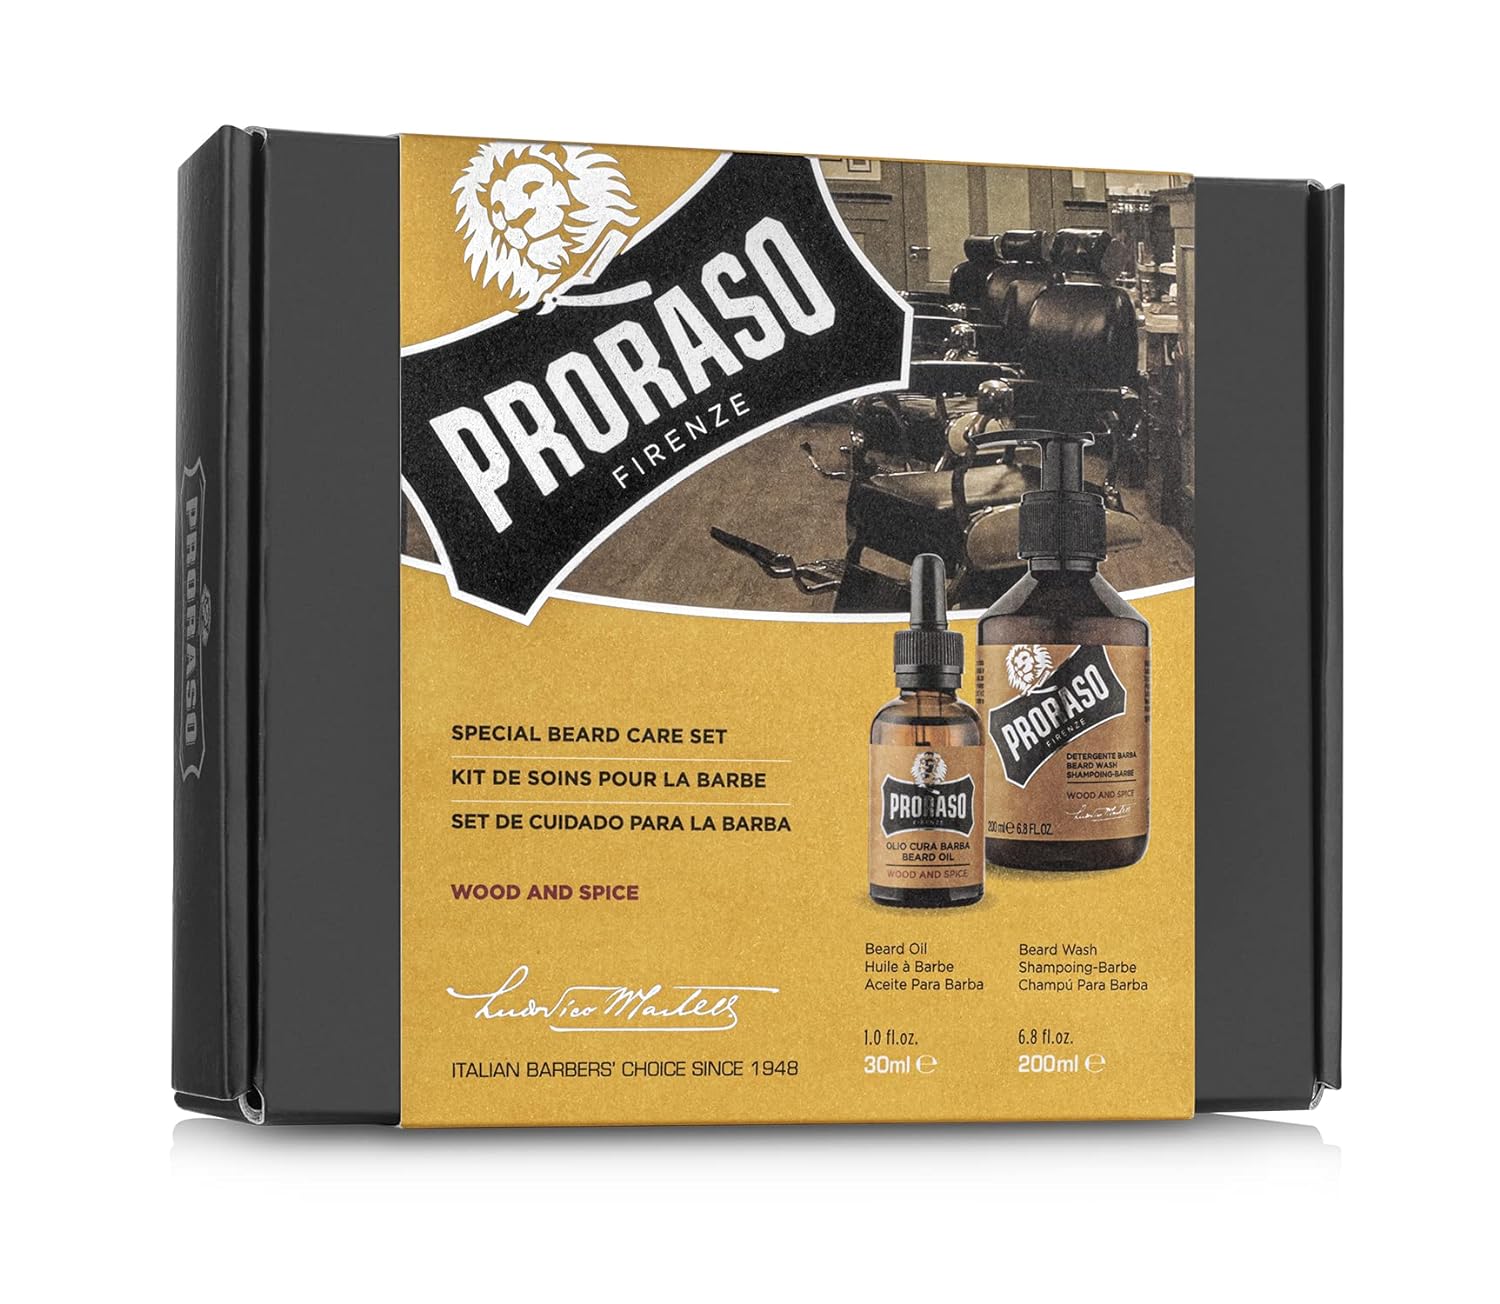 Proraso Beard Care Kit for Men | Beard Wash & Beard Oil with Sandalwood to Tame, Cleanse & Detangle Full, Thick and Coarse Beards | Wood & Spice : Beauty & Personal Care